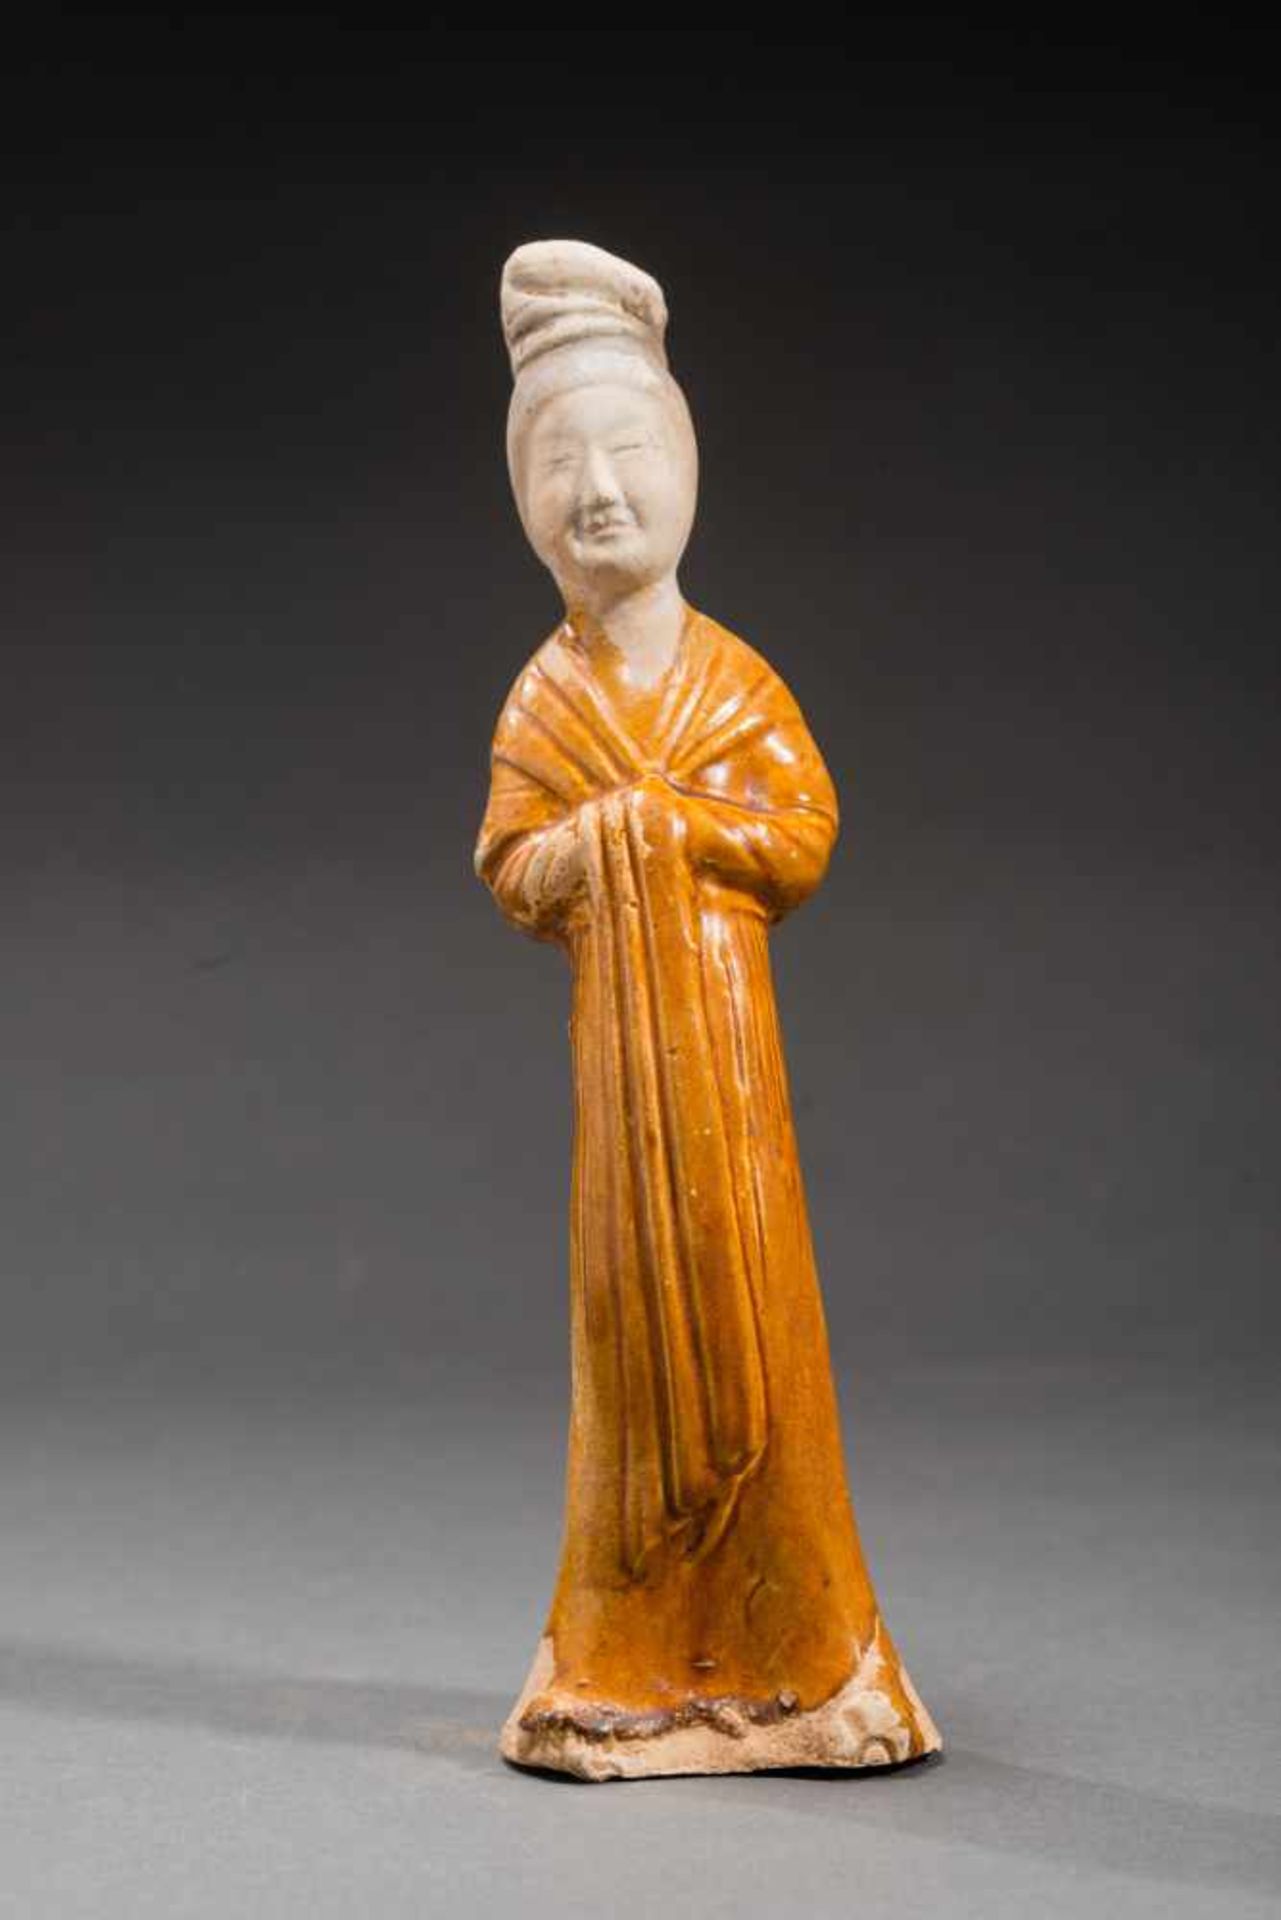 FIGURINE OF A COURTLY LADY Glazed ceramic with paintingChina, Sui (581-618) to early Tang Dynasty (